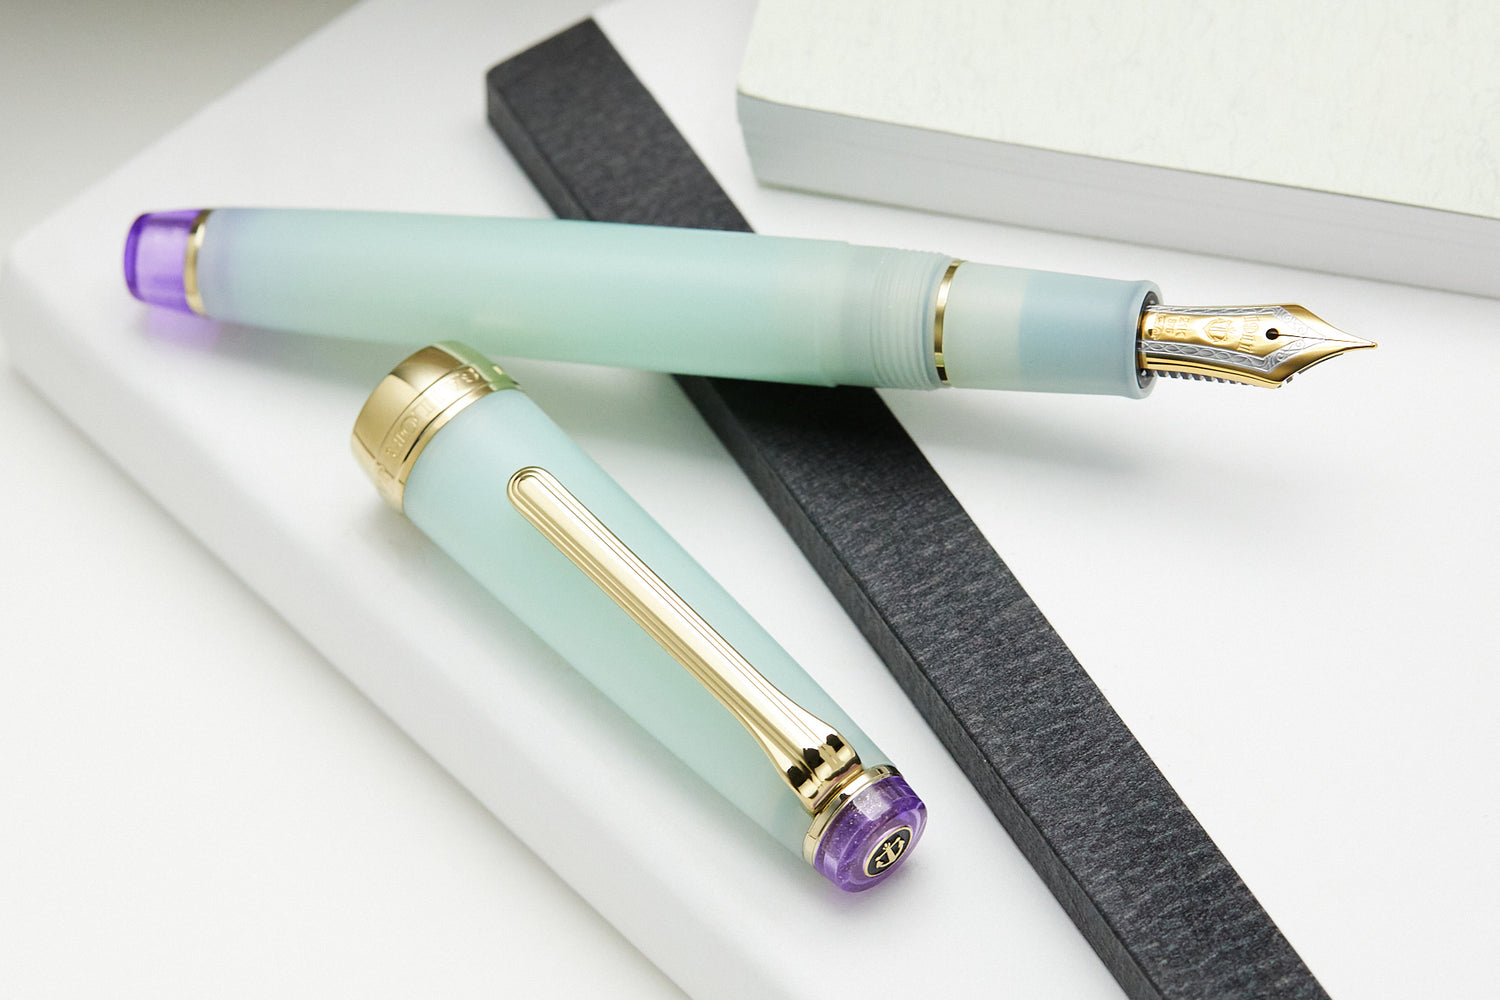 Glow-in-the-Dark Fountain Pens & Accessories - The Goulet Pen Company